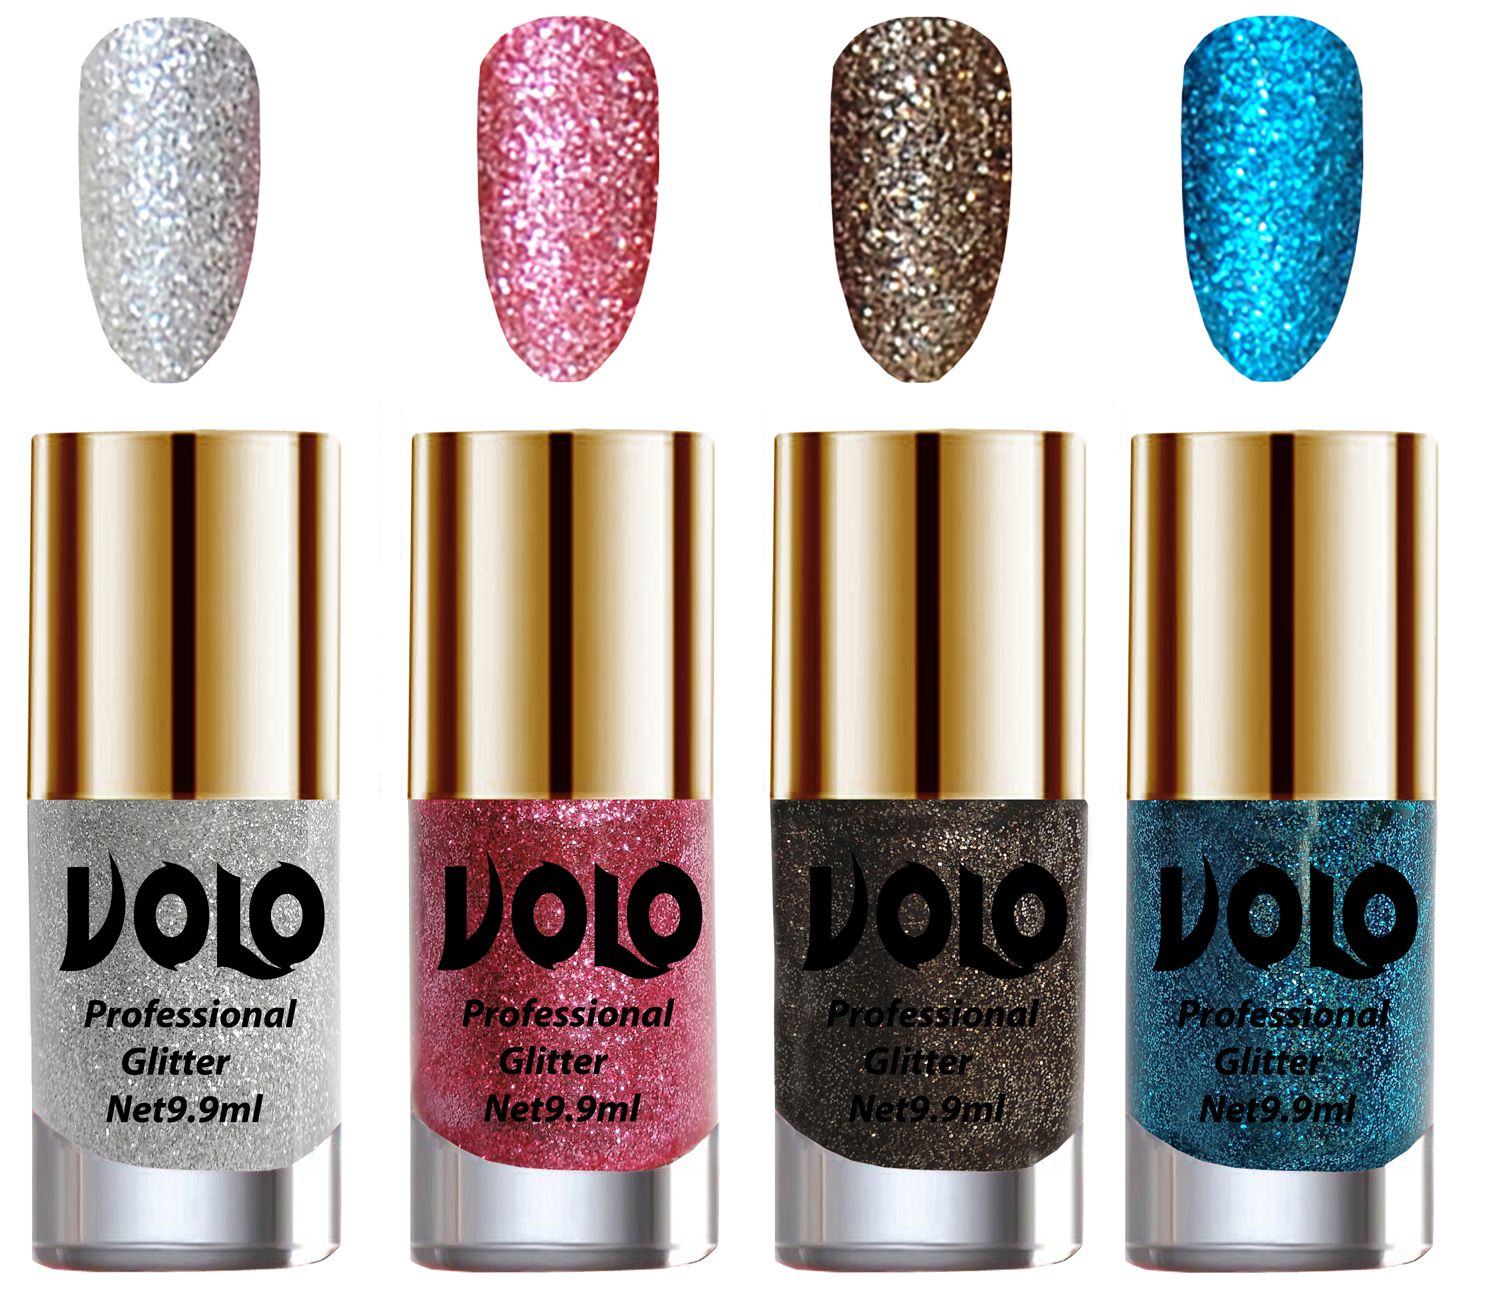     			VOLO Professionally Used Glitter Shine Nail Polish Silver,Pink,Grey Blue Pack of 4 39 mL